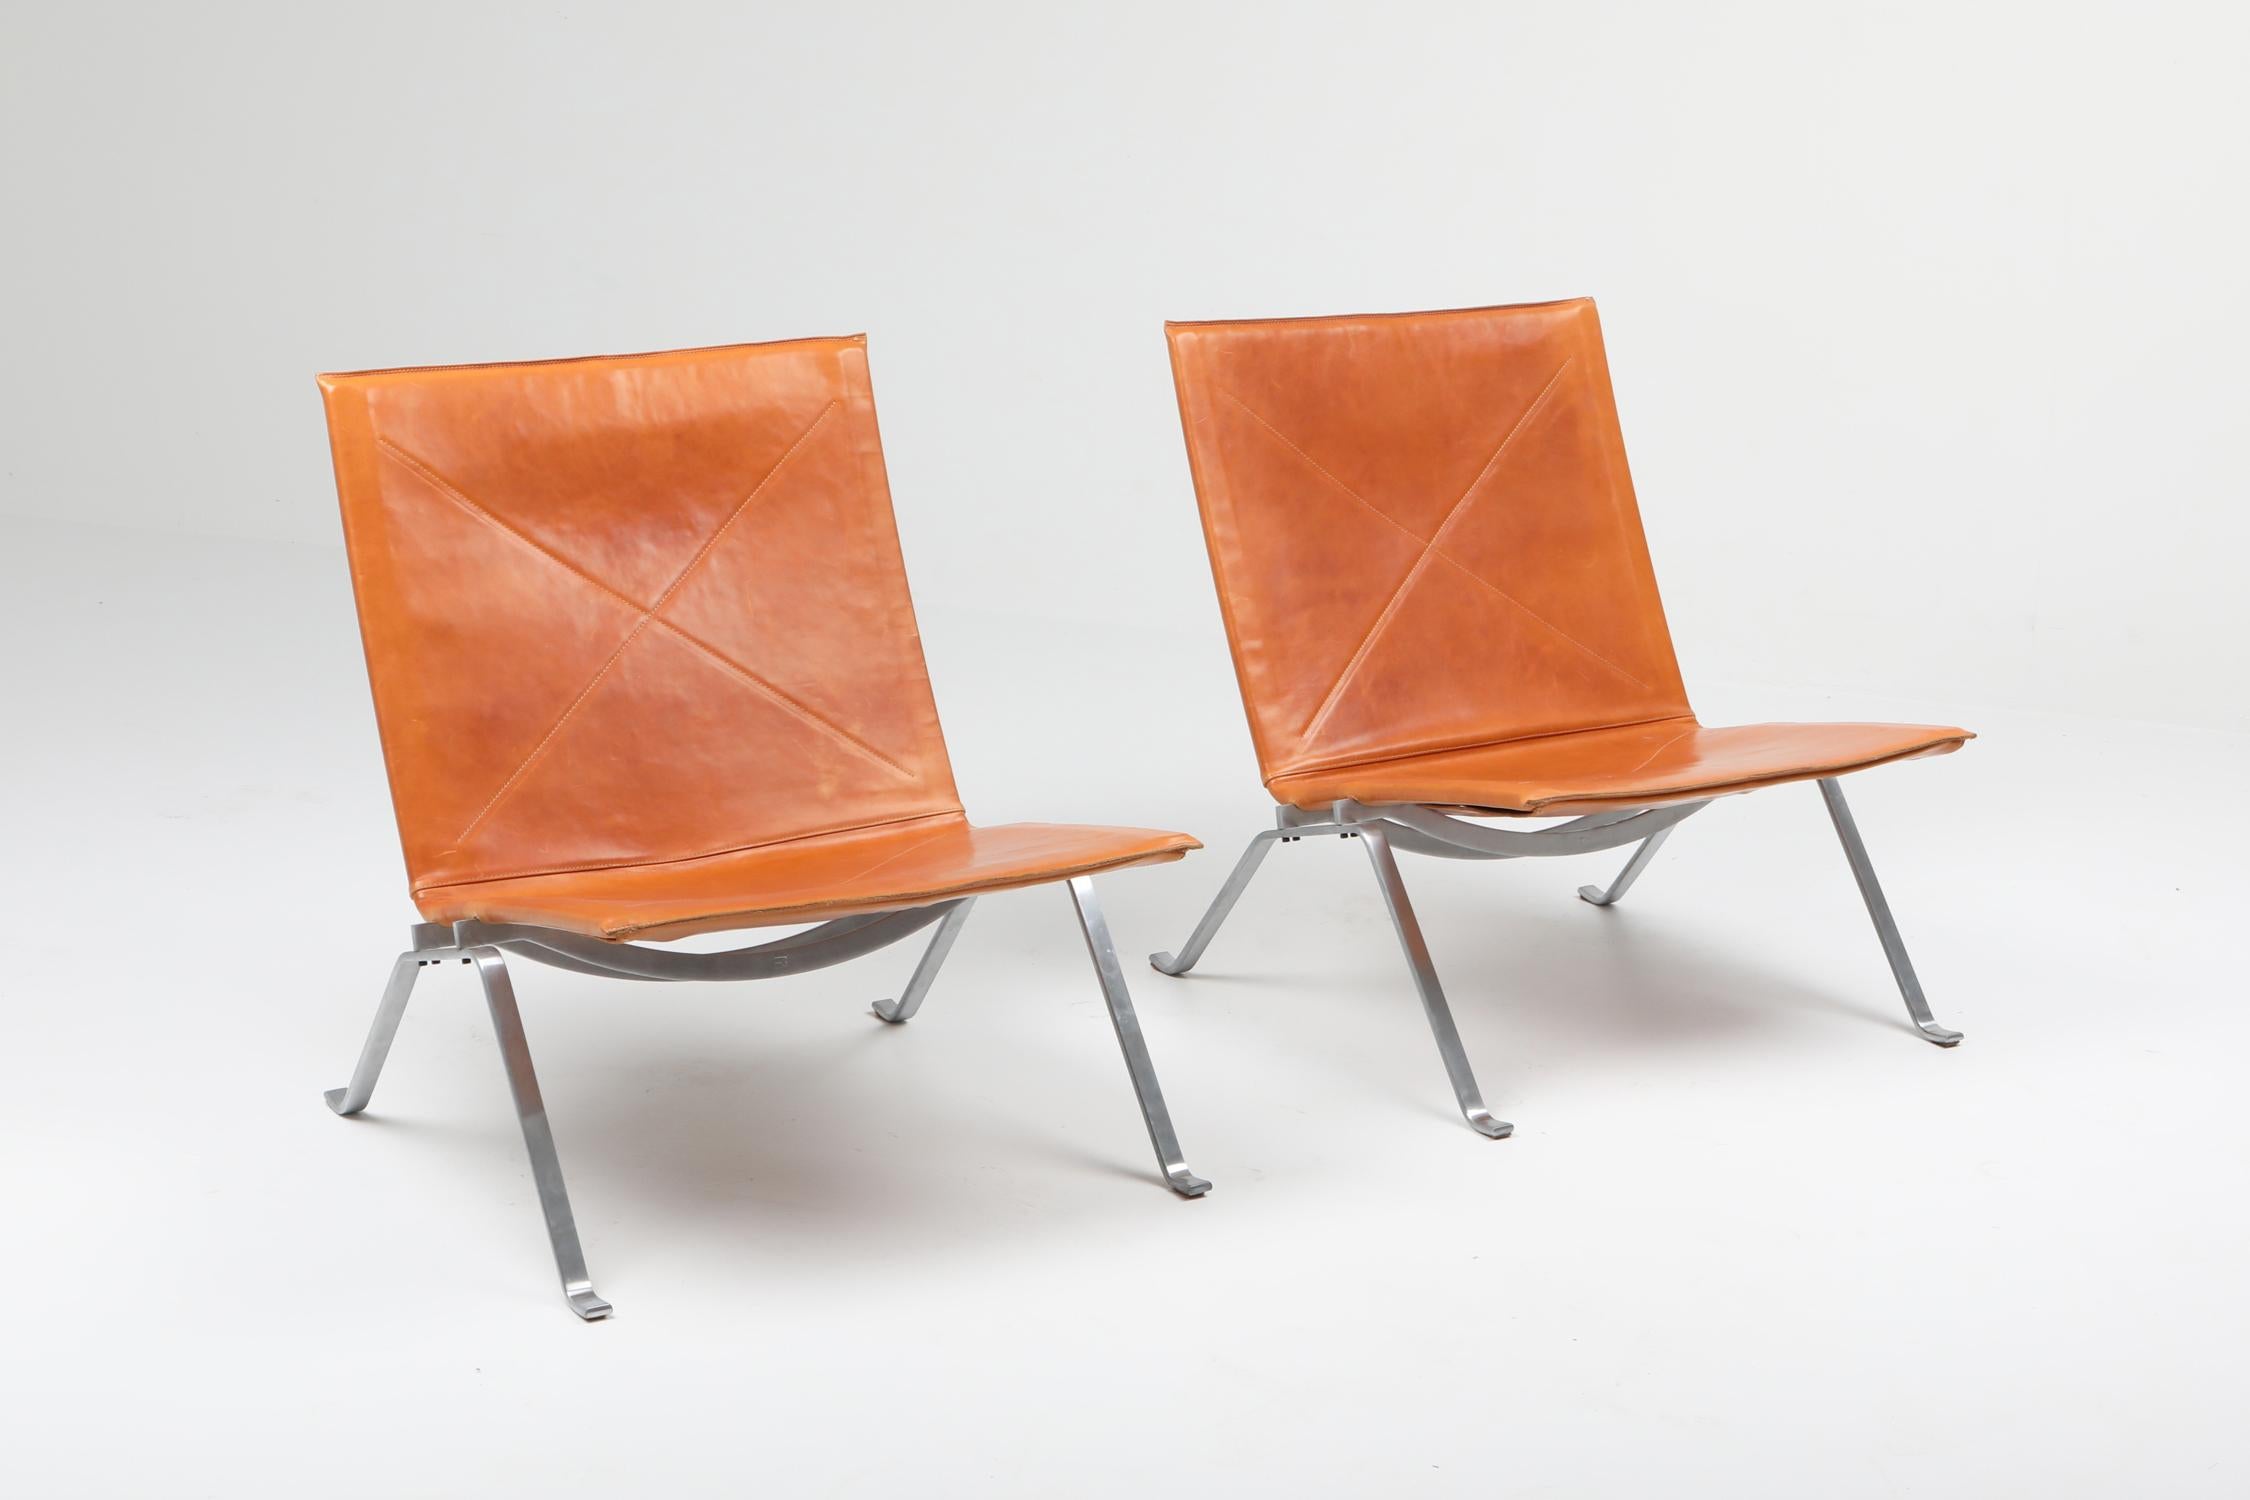 Poul Kjaerholm, PK22 , E.Kold Christensen edition, Denmark, 1960s

Scandinavian modern archetypical lounge chair in the most beautiful cognac leather.

Designed in 1956, these chairs are early editions made by Kold Christensen.
 